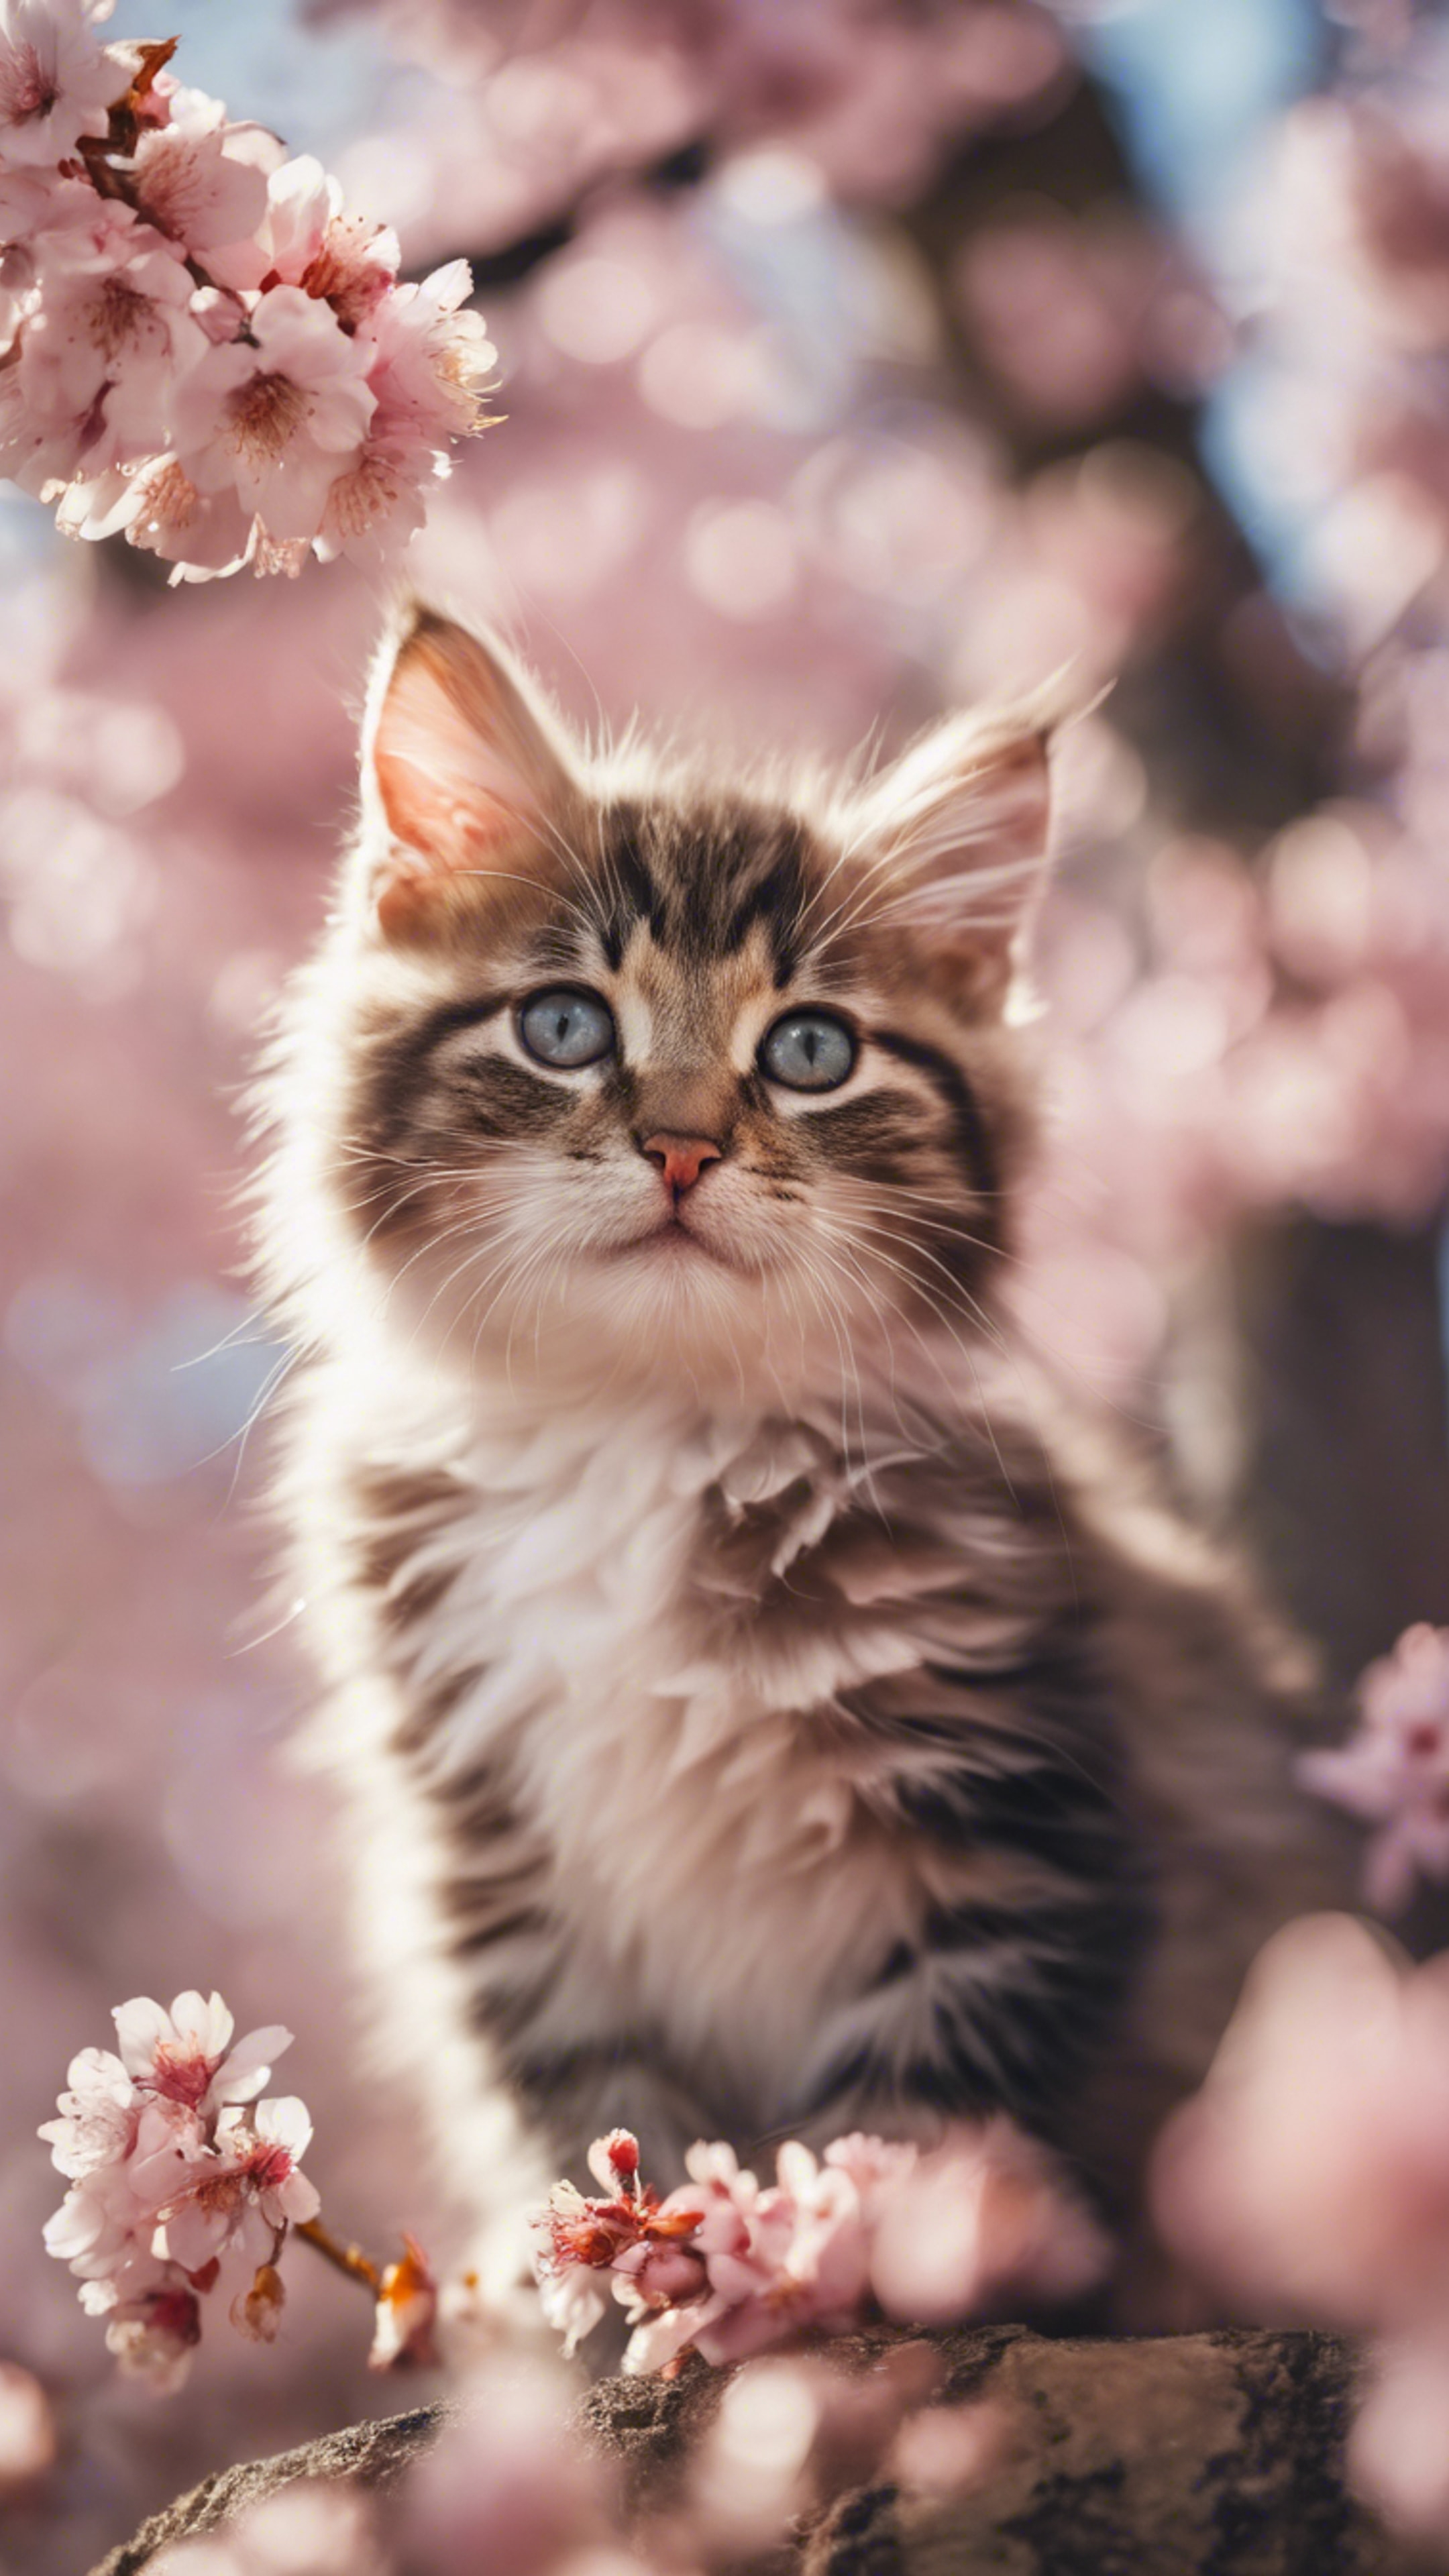 A cherry blossom tree in full bloom as the backdrop to a playful kitten in spring. Tapeta na zeď[56e1c1b9132e46d98bd1]